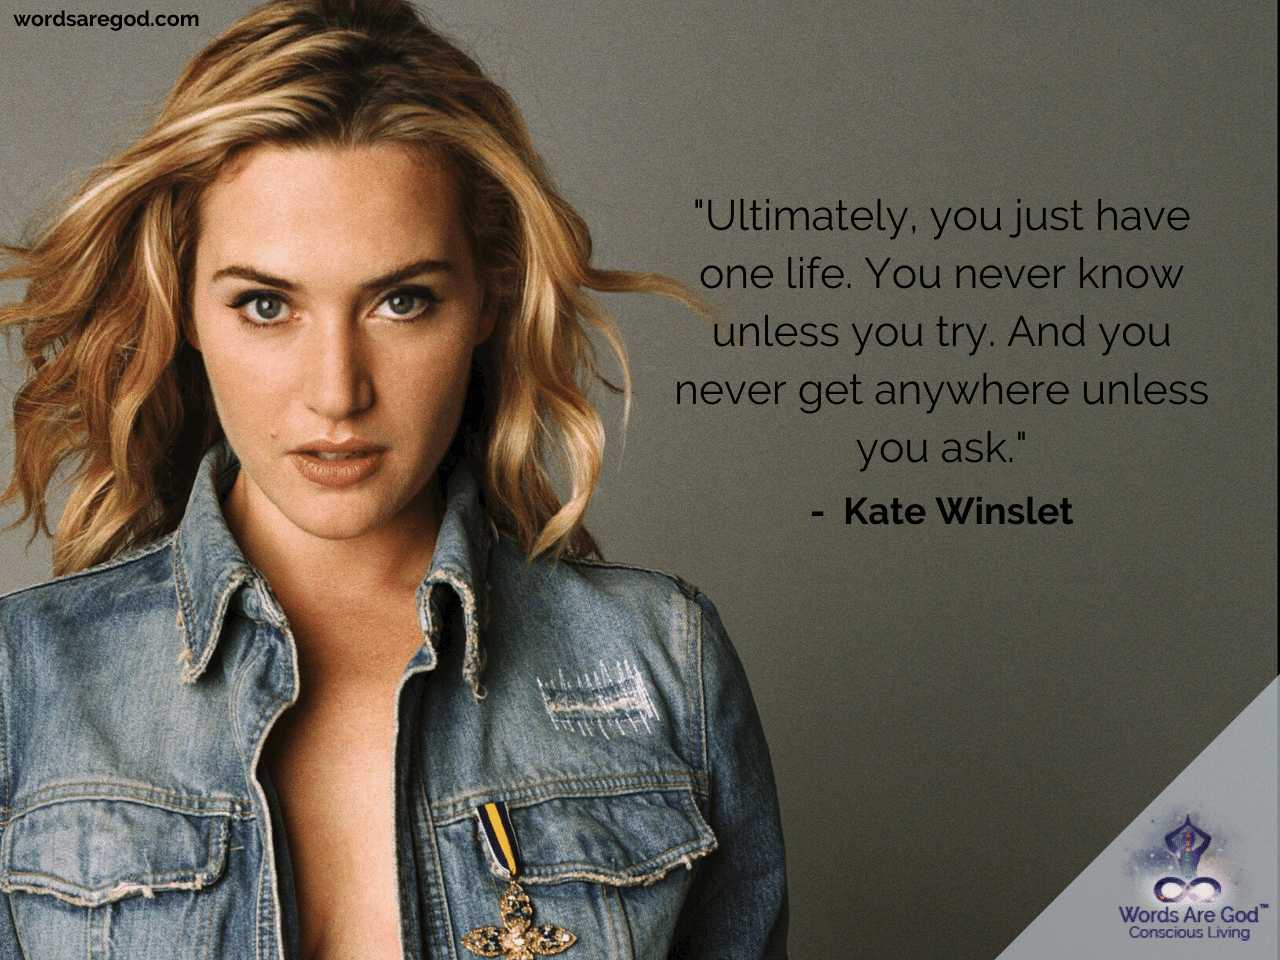 Kate Winslet Best Quotes